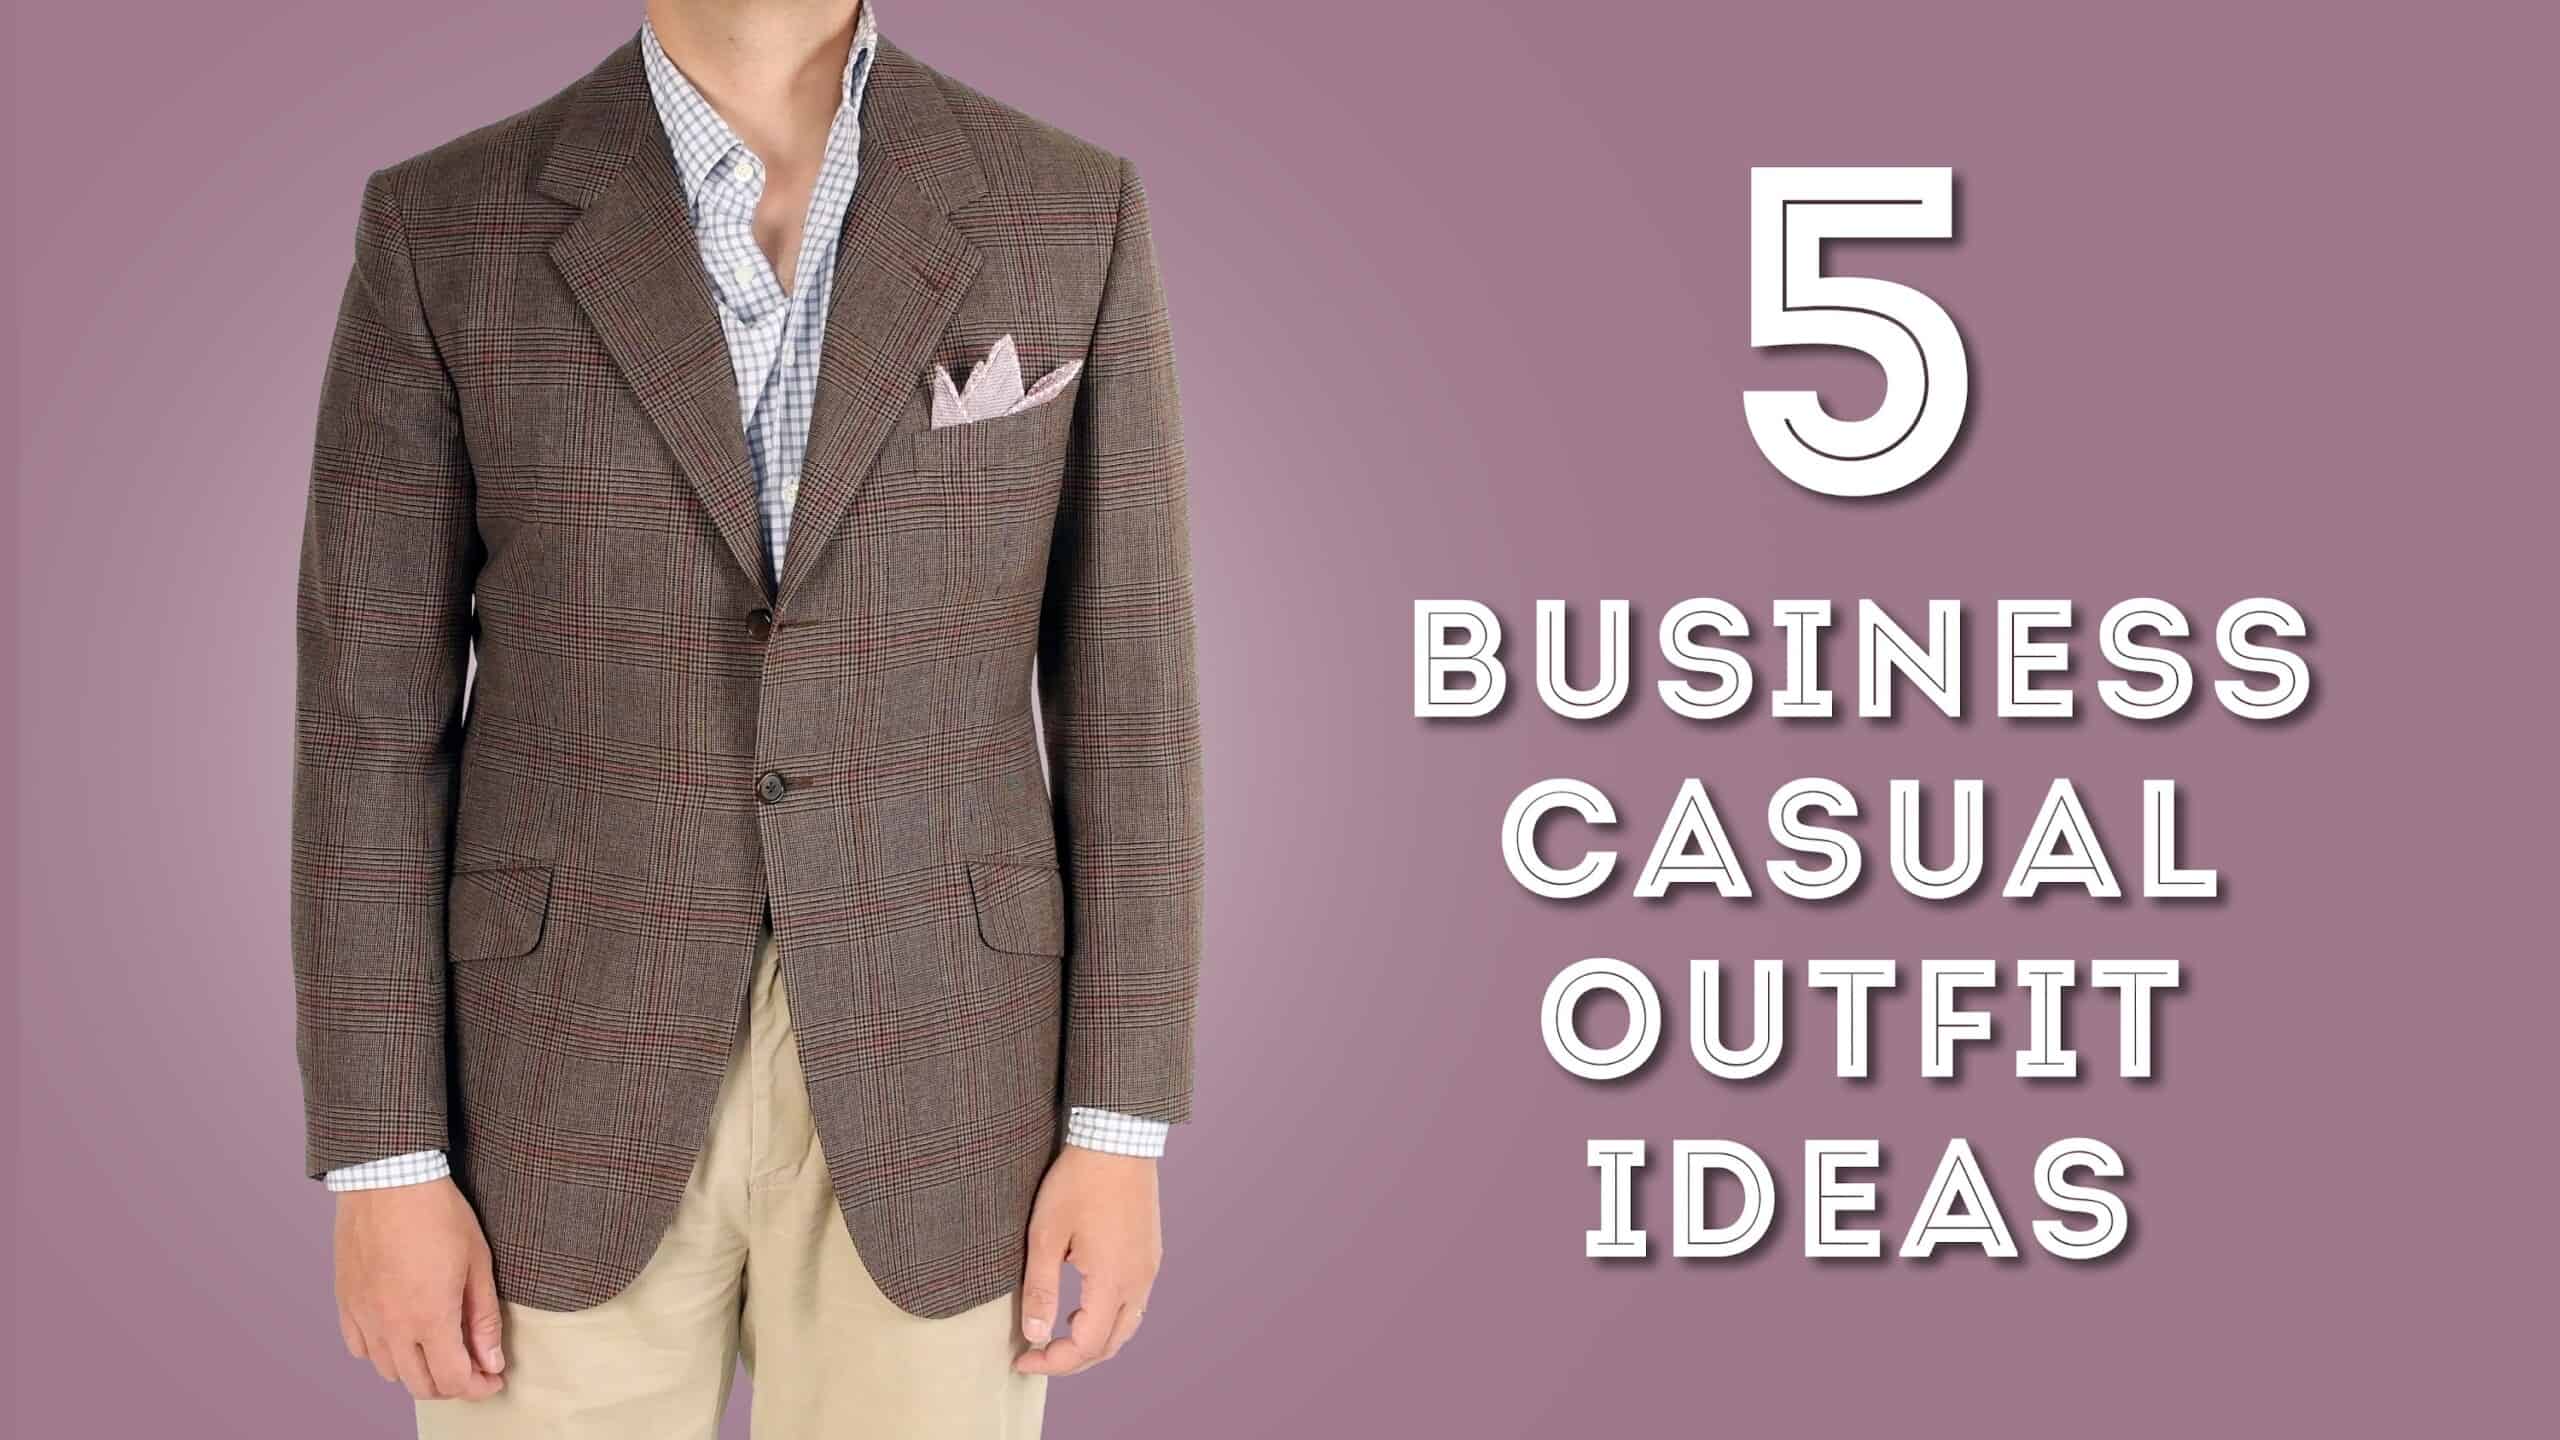 5 business casual outfit ideas scaled